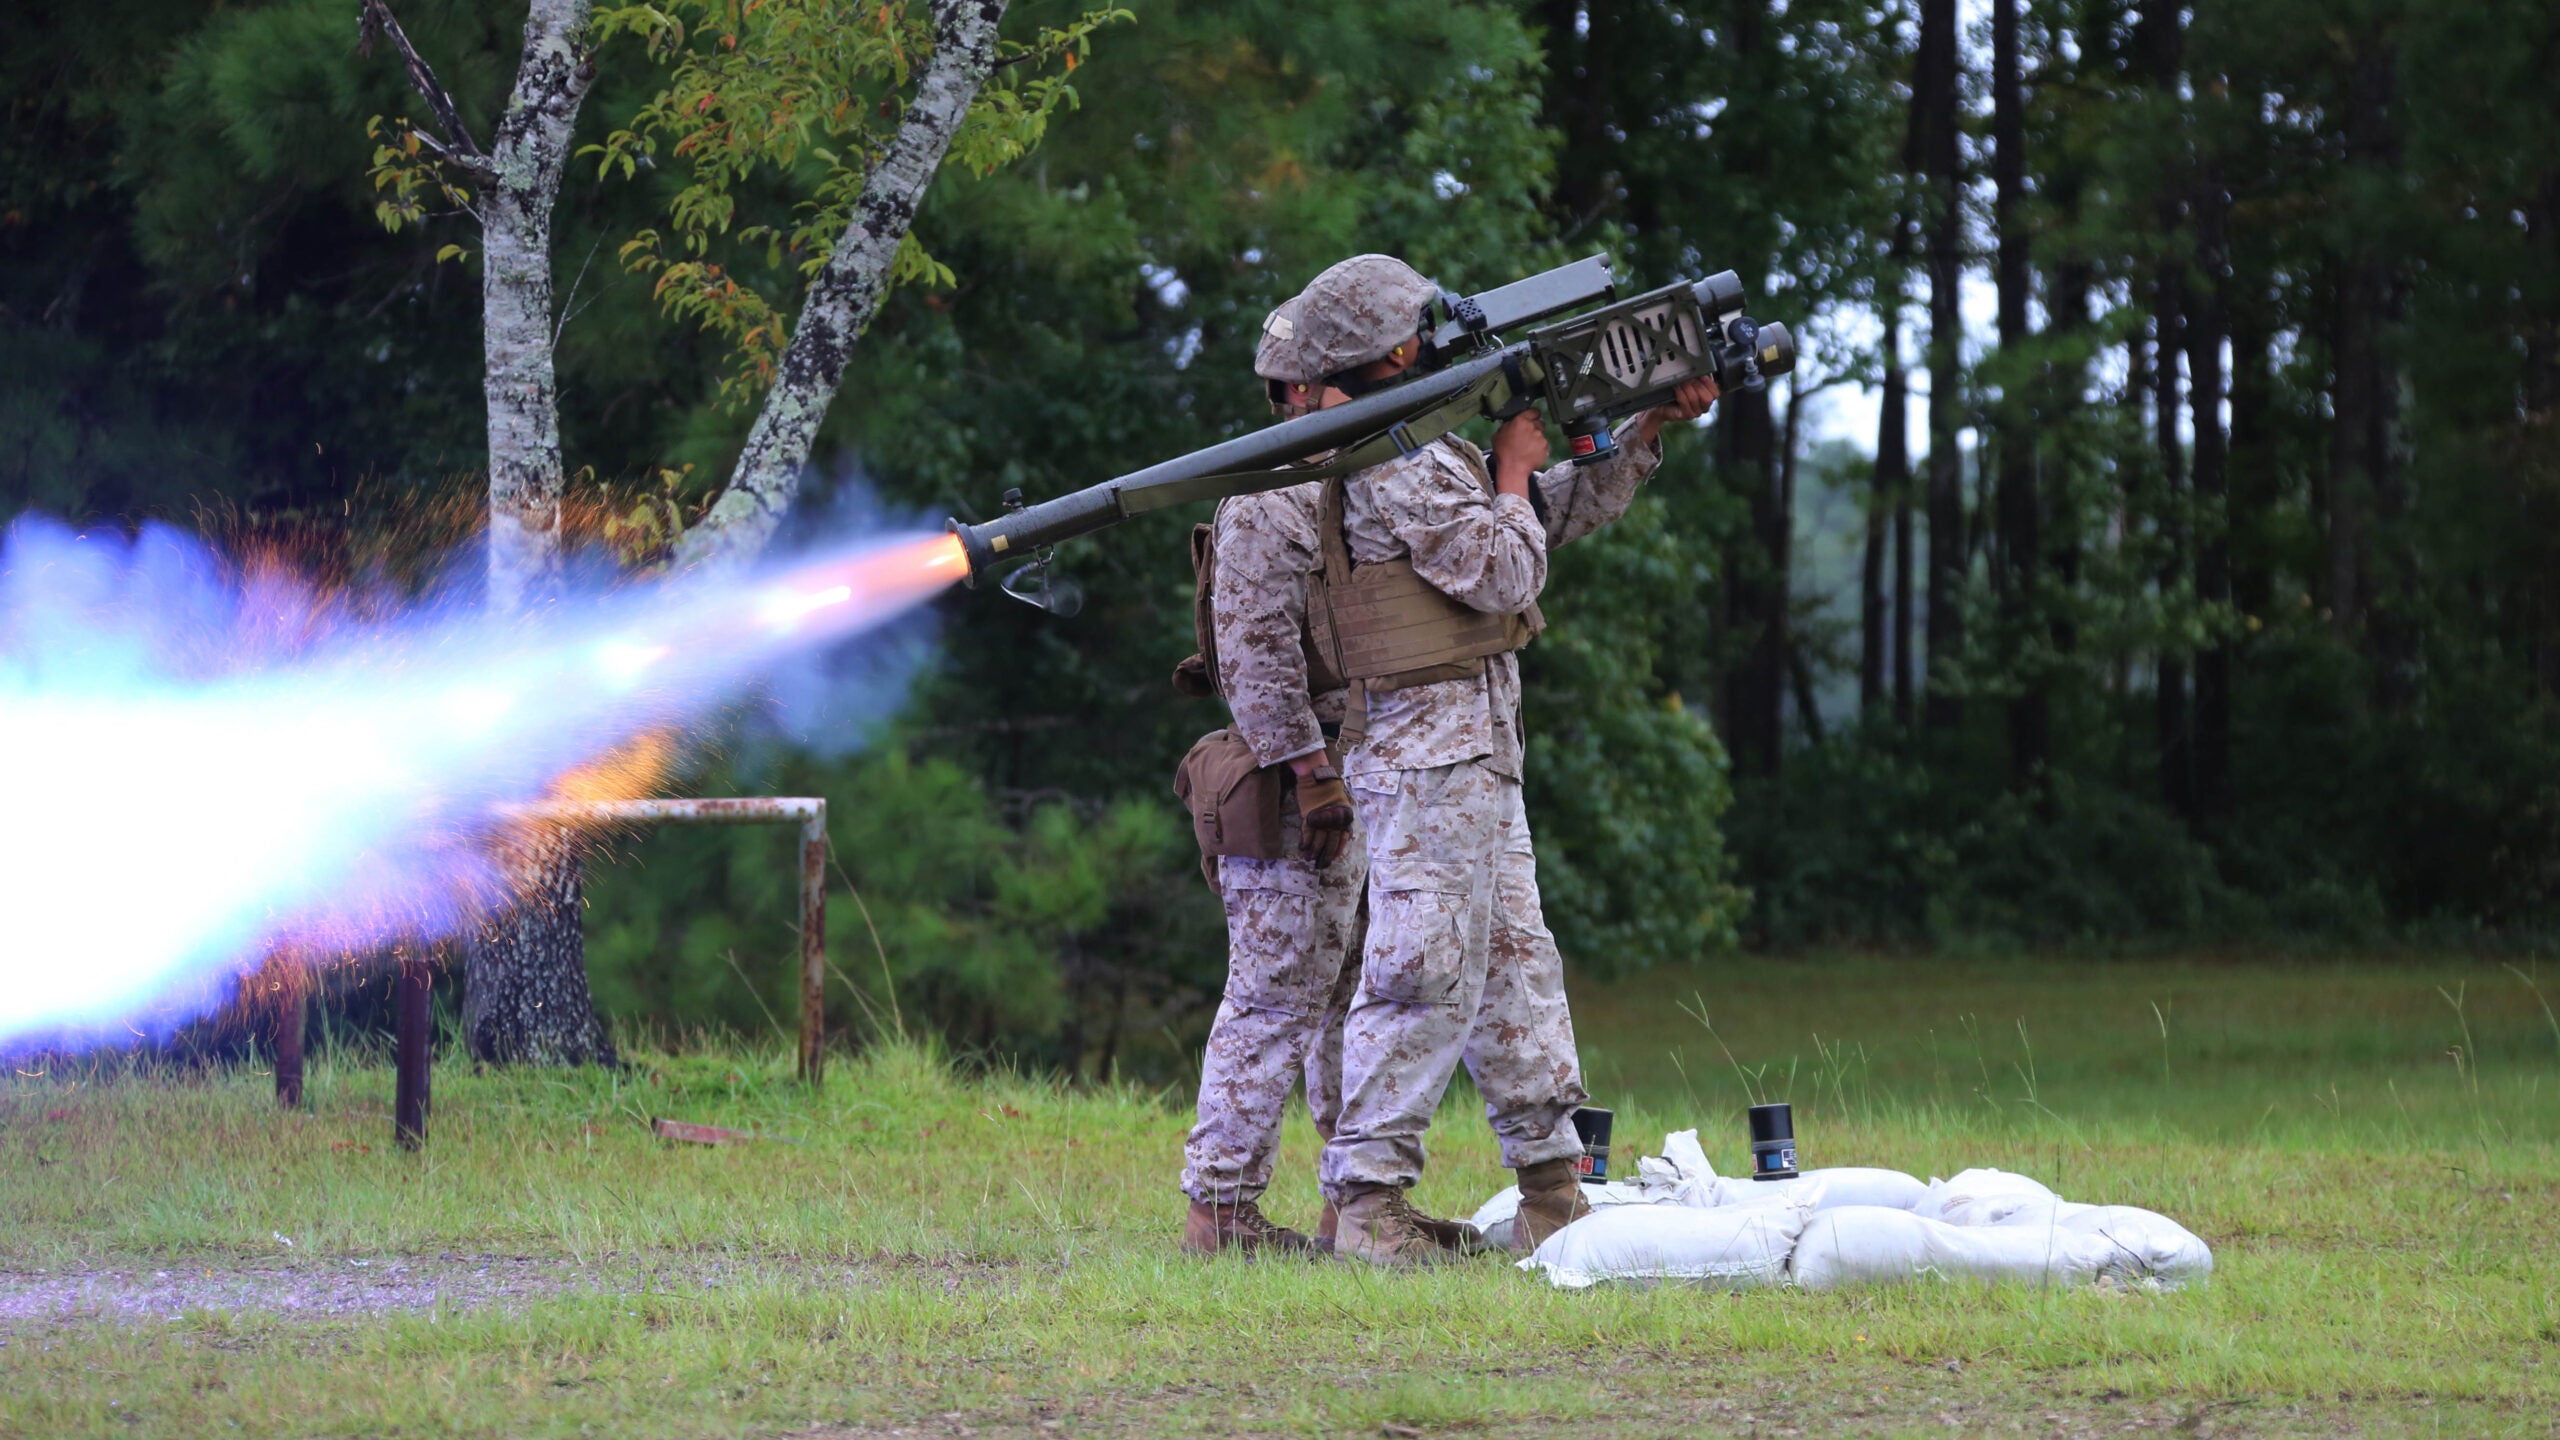 A Marine fires an FIM-92 Stinger Missile at a target during a stinger simulation training range at Marine Corps Air Station Cherry Point, N.C., Sept. 24, 2015. Marines with 2nd Low Altitude Air Defense Battalion sharpened their proficiency skills by simulating the weight transfer felt when firing the 34.2 pound missile. The weapon is a personal and portable infrared, homing, surface-to-air missile capable of tracking and engaging aircraft up to an altitude of 10,000 feet and covering distances up to eight kilometers. 2nd LAAD utilizes the stinger missile to provide ground-to-air defense to the 2nd Marine Aircraft Wing and Marine Air-Ground Task Force elements.